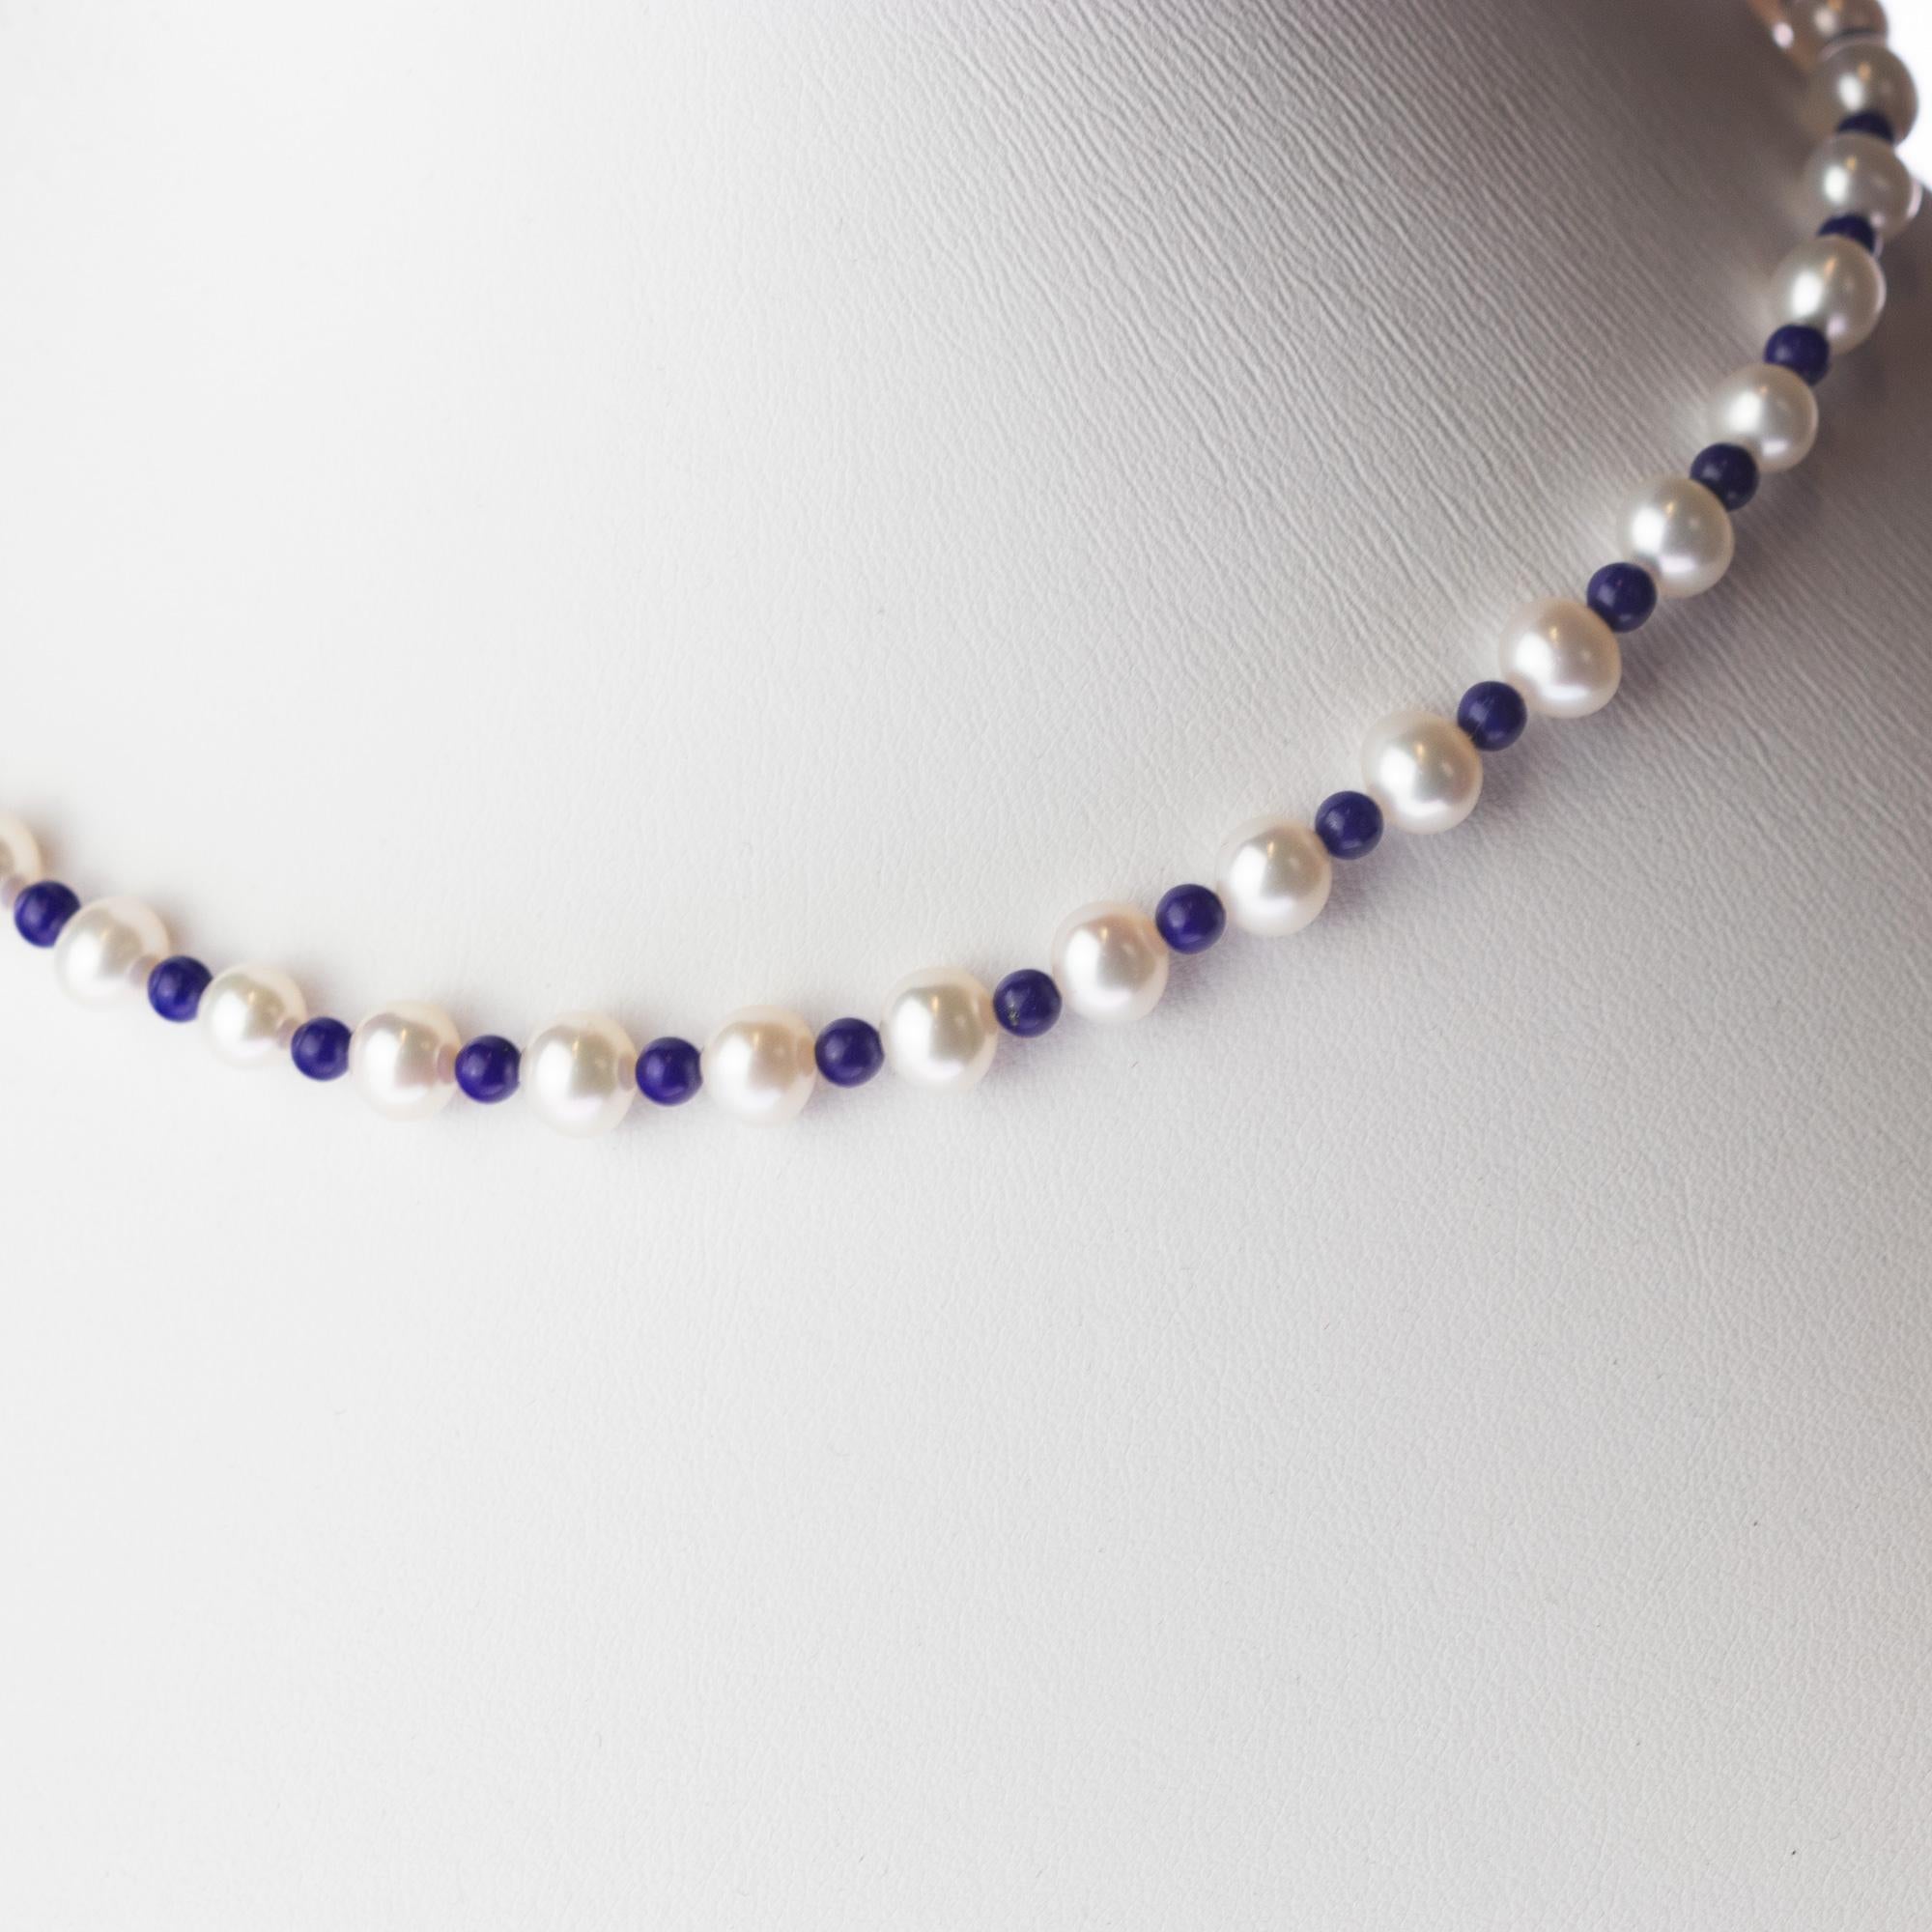 A natural freshwater pearls and high quality lapis lazuli necklace full of design. A modern and delicate style for a young and fearless woman. Delight yourself with a luminous handmade jewelry. Natural precious stones with a 18 karat yellow gold